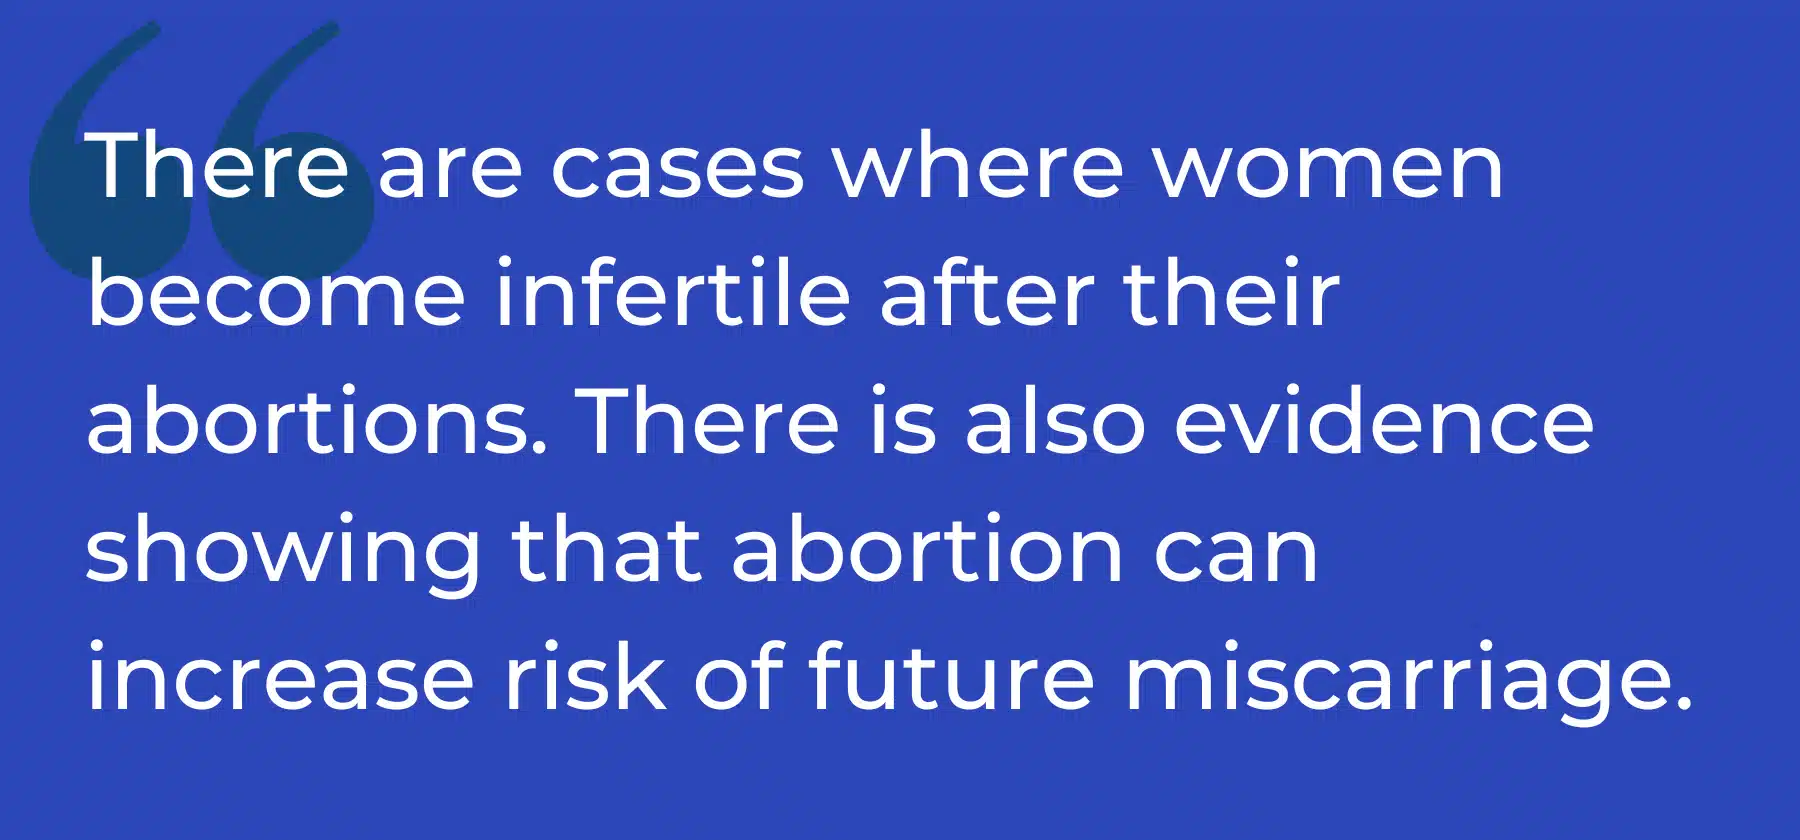 quotation on the connection between abortion and future infertility and miscarriage